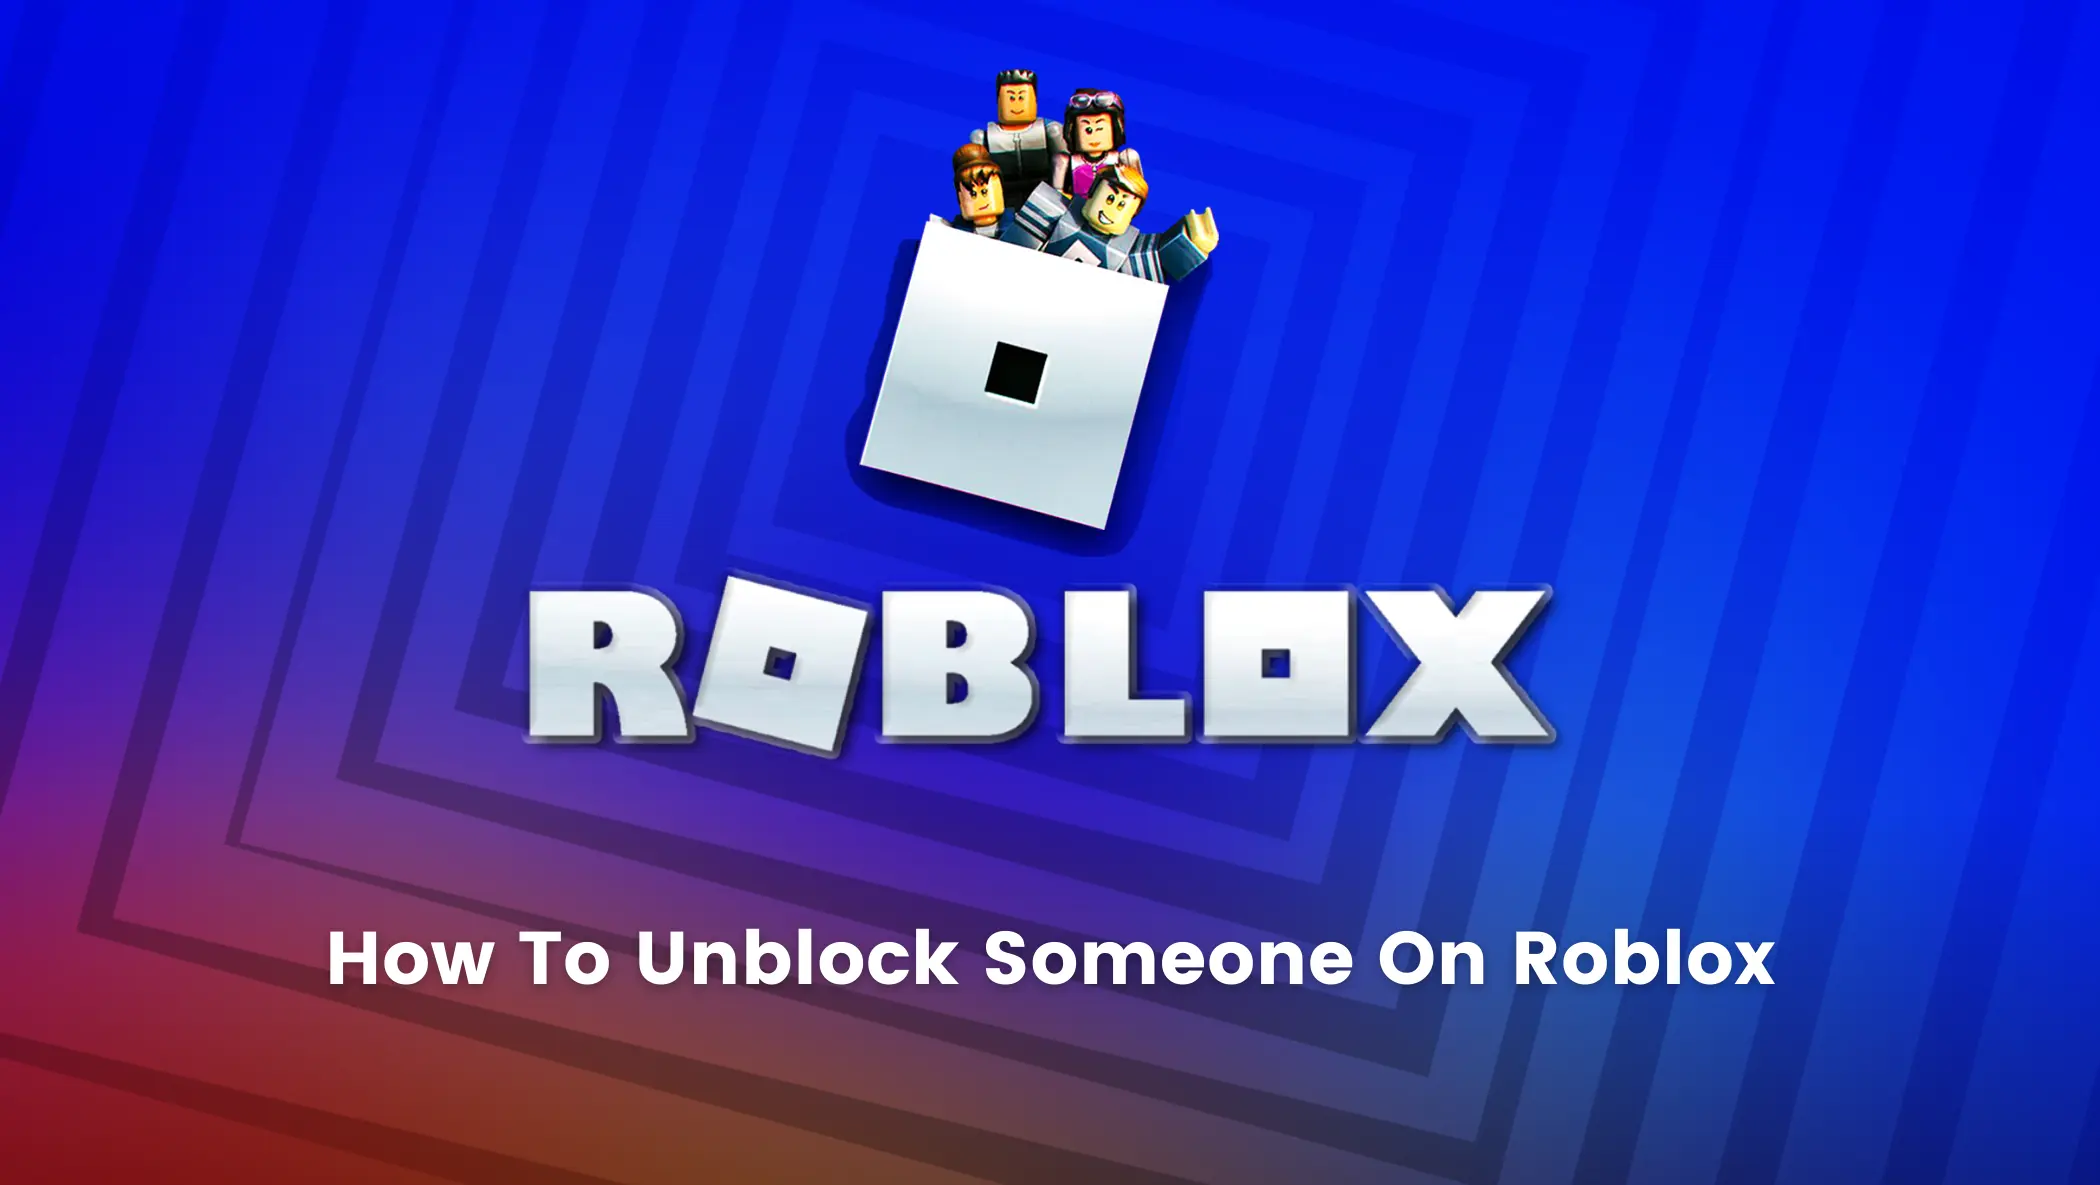 How To Unblock Someone On Roblox